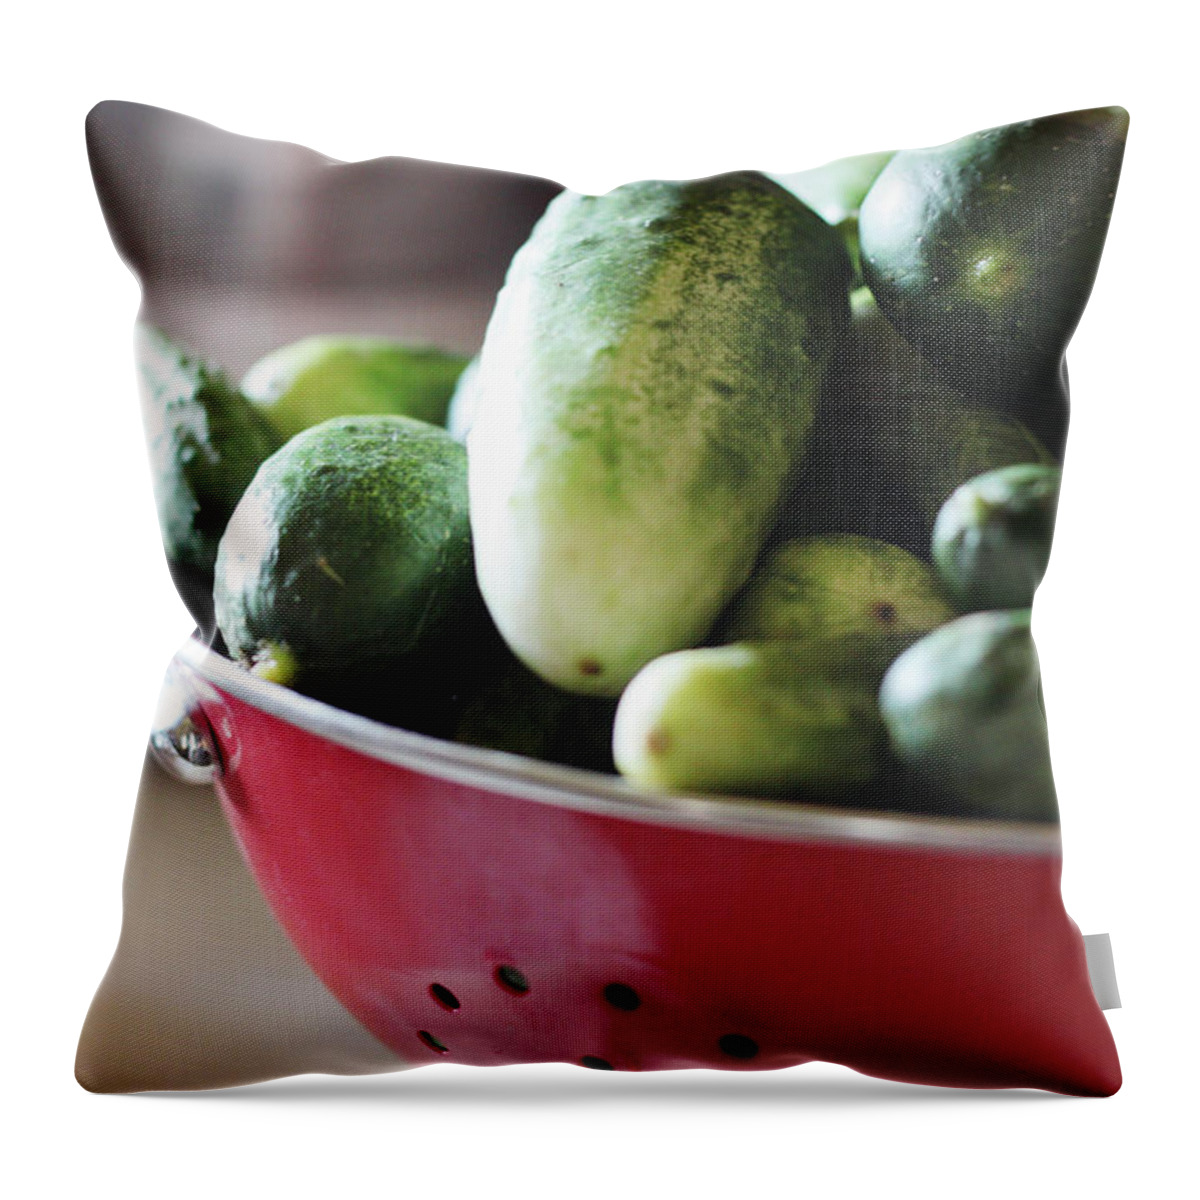 Healthy Eating Throw Pillow featuring the photograph Cucumbers by Photos By By Deb Alperin